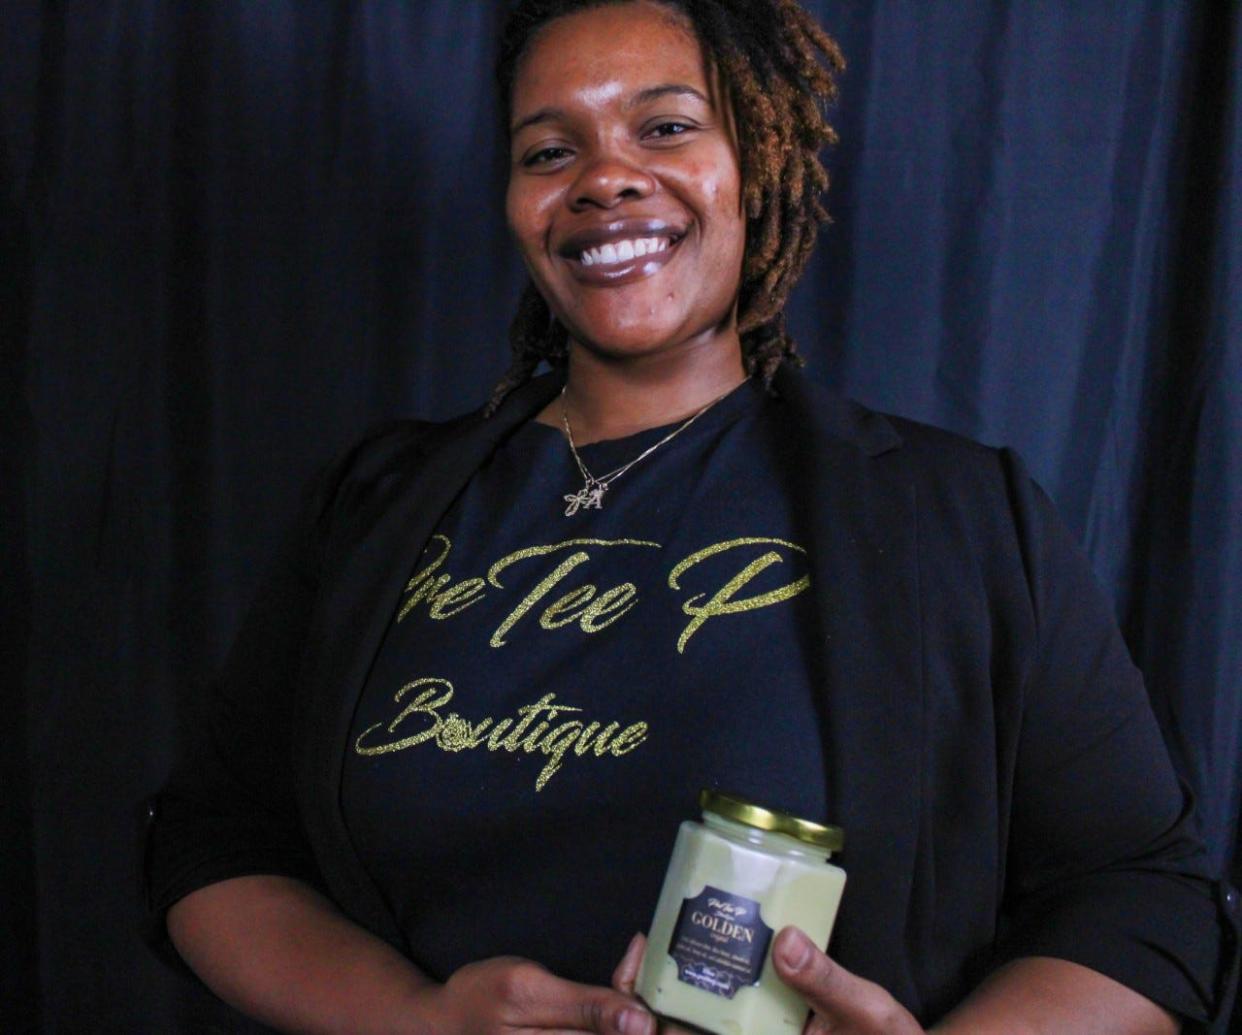 Azha McNeil of Fayetteville is founder of the wellness company, PreTee Boutique. On Saturday, Nov. 26, 2022, the company will host a Health is Wealth Symposium at the Kiwanis Recreation Center.